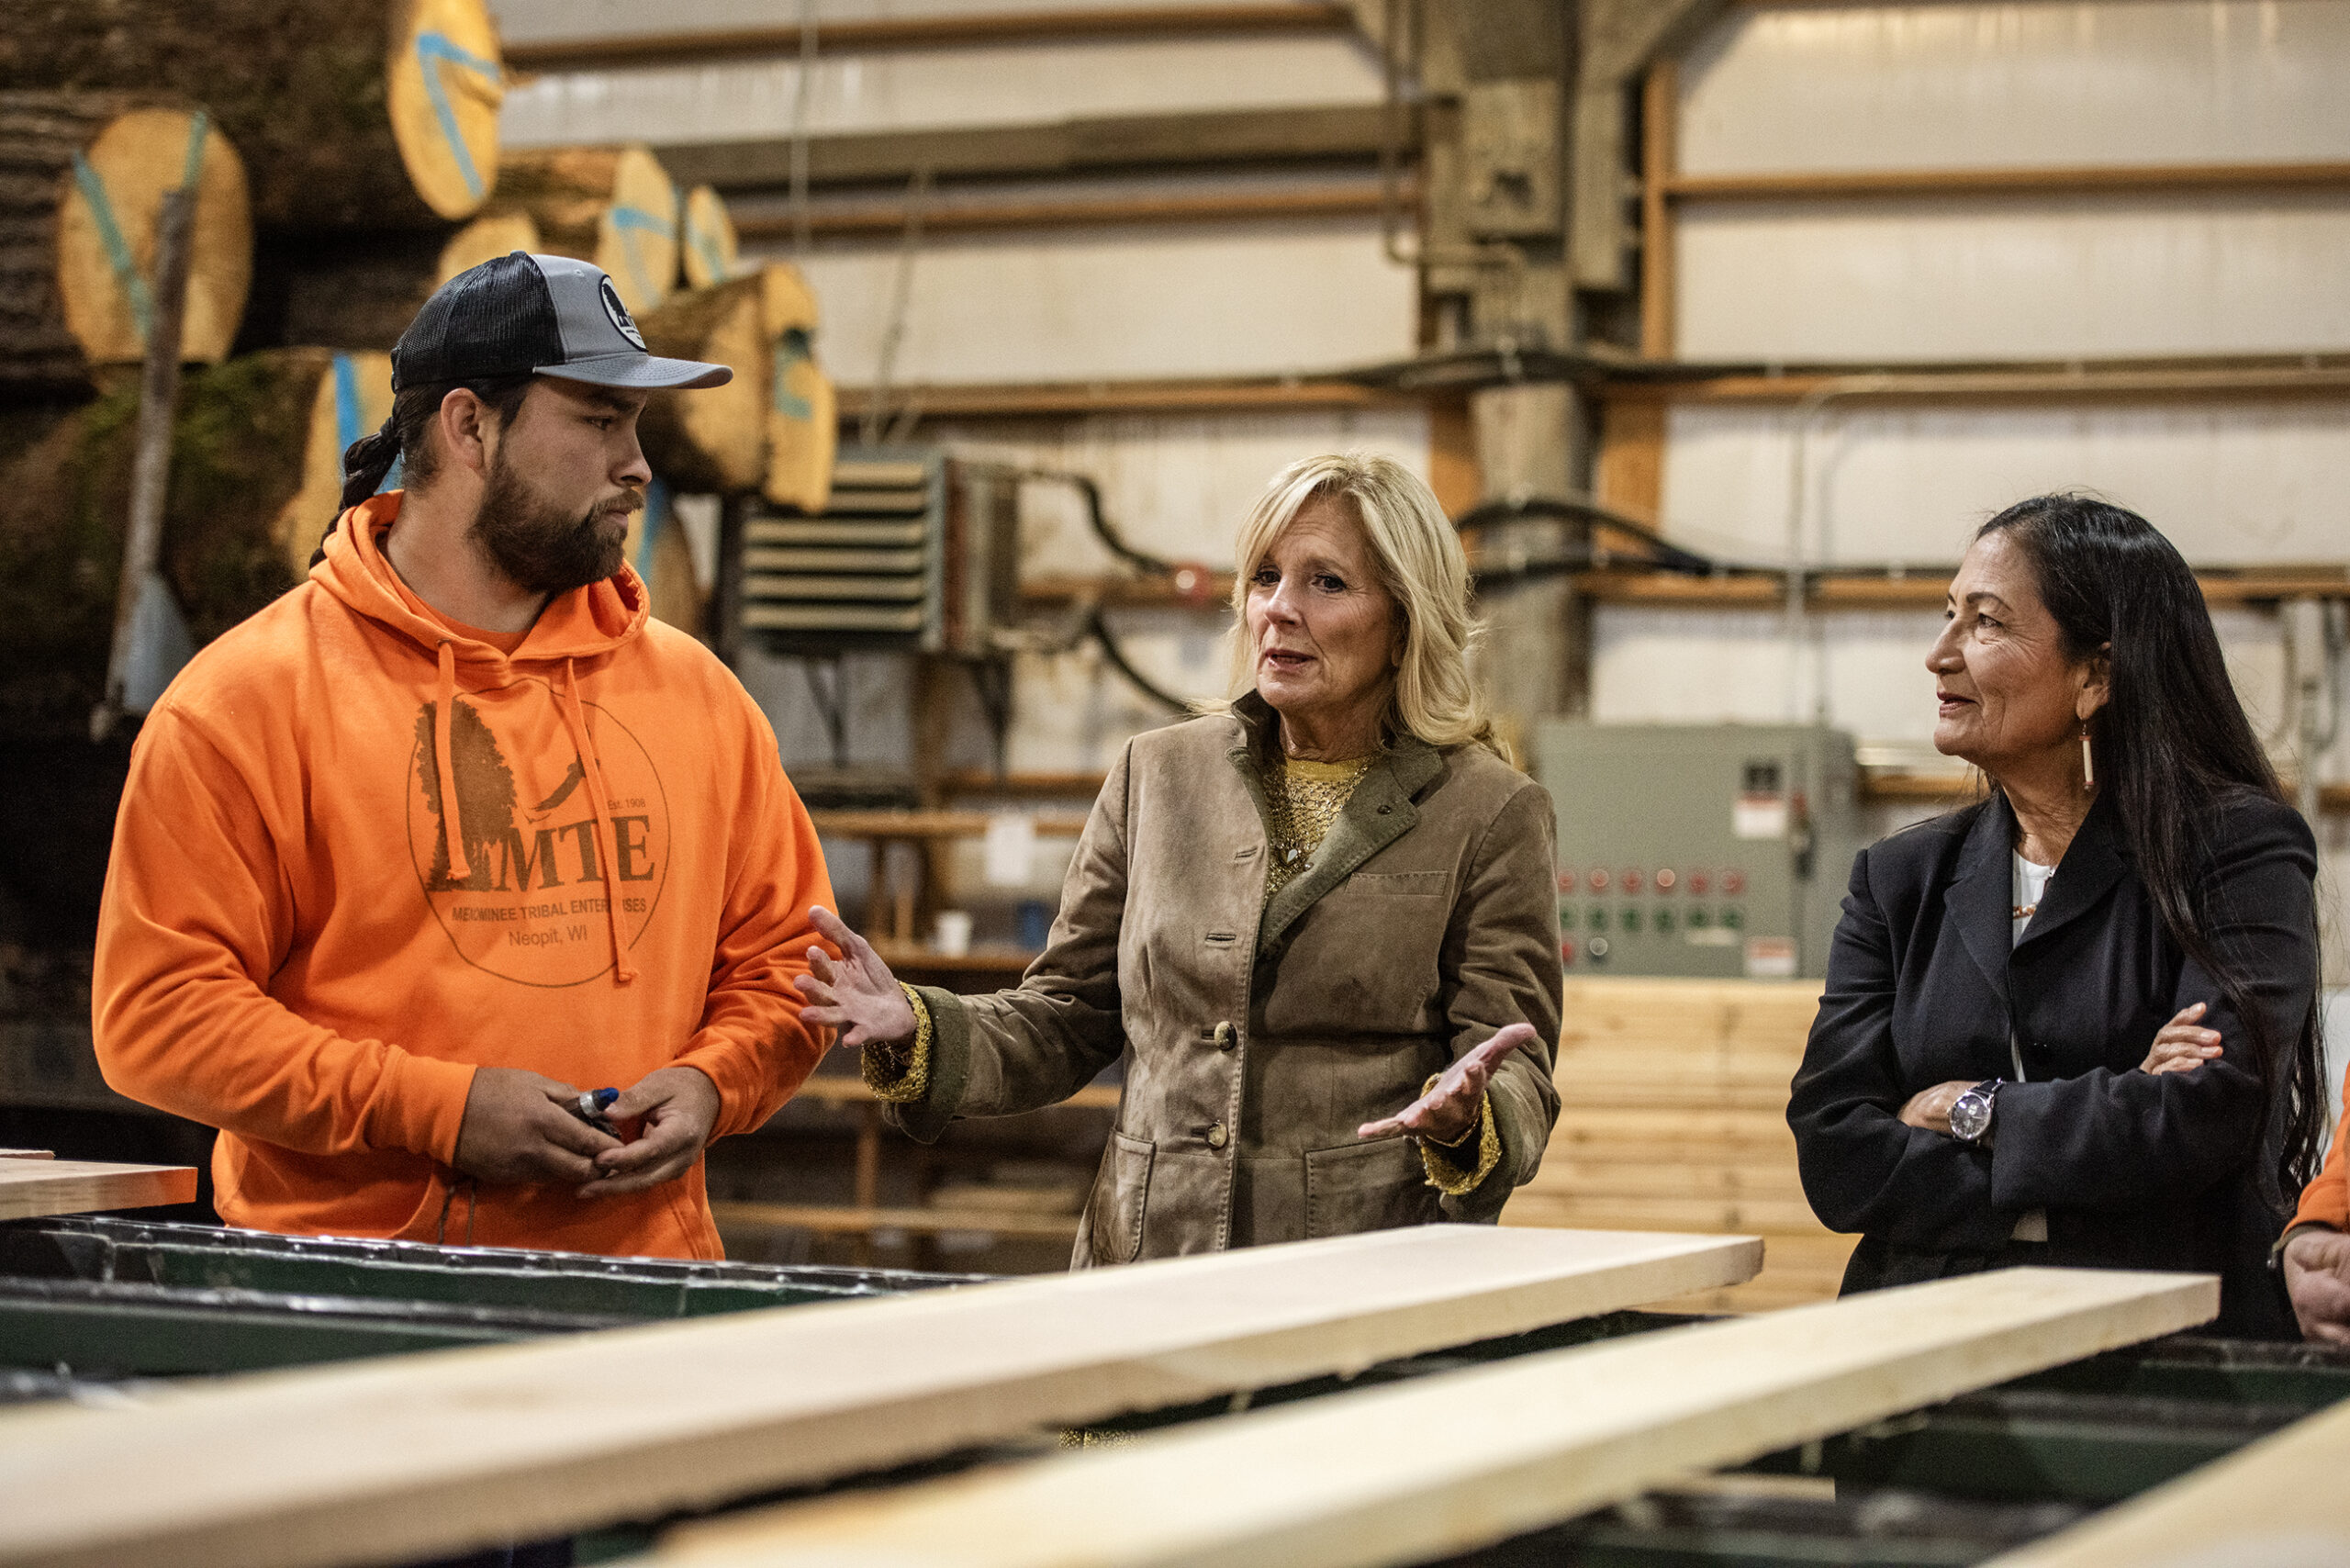 Jill Biden and Deb Haaland stand in front of wooden planks as a worker answers their questions.